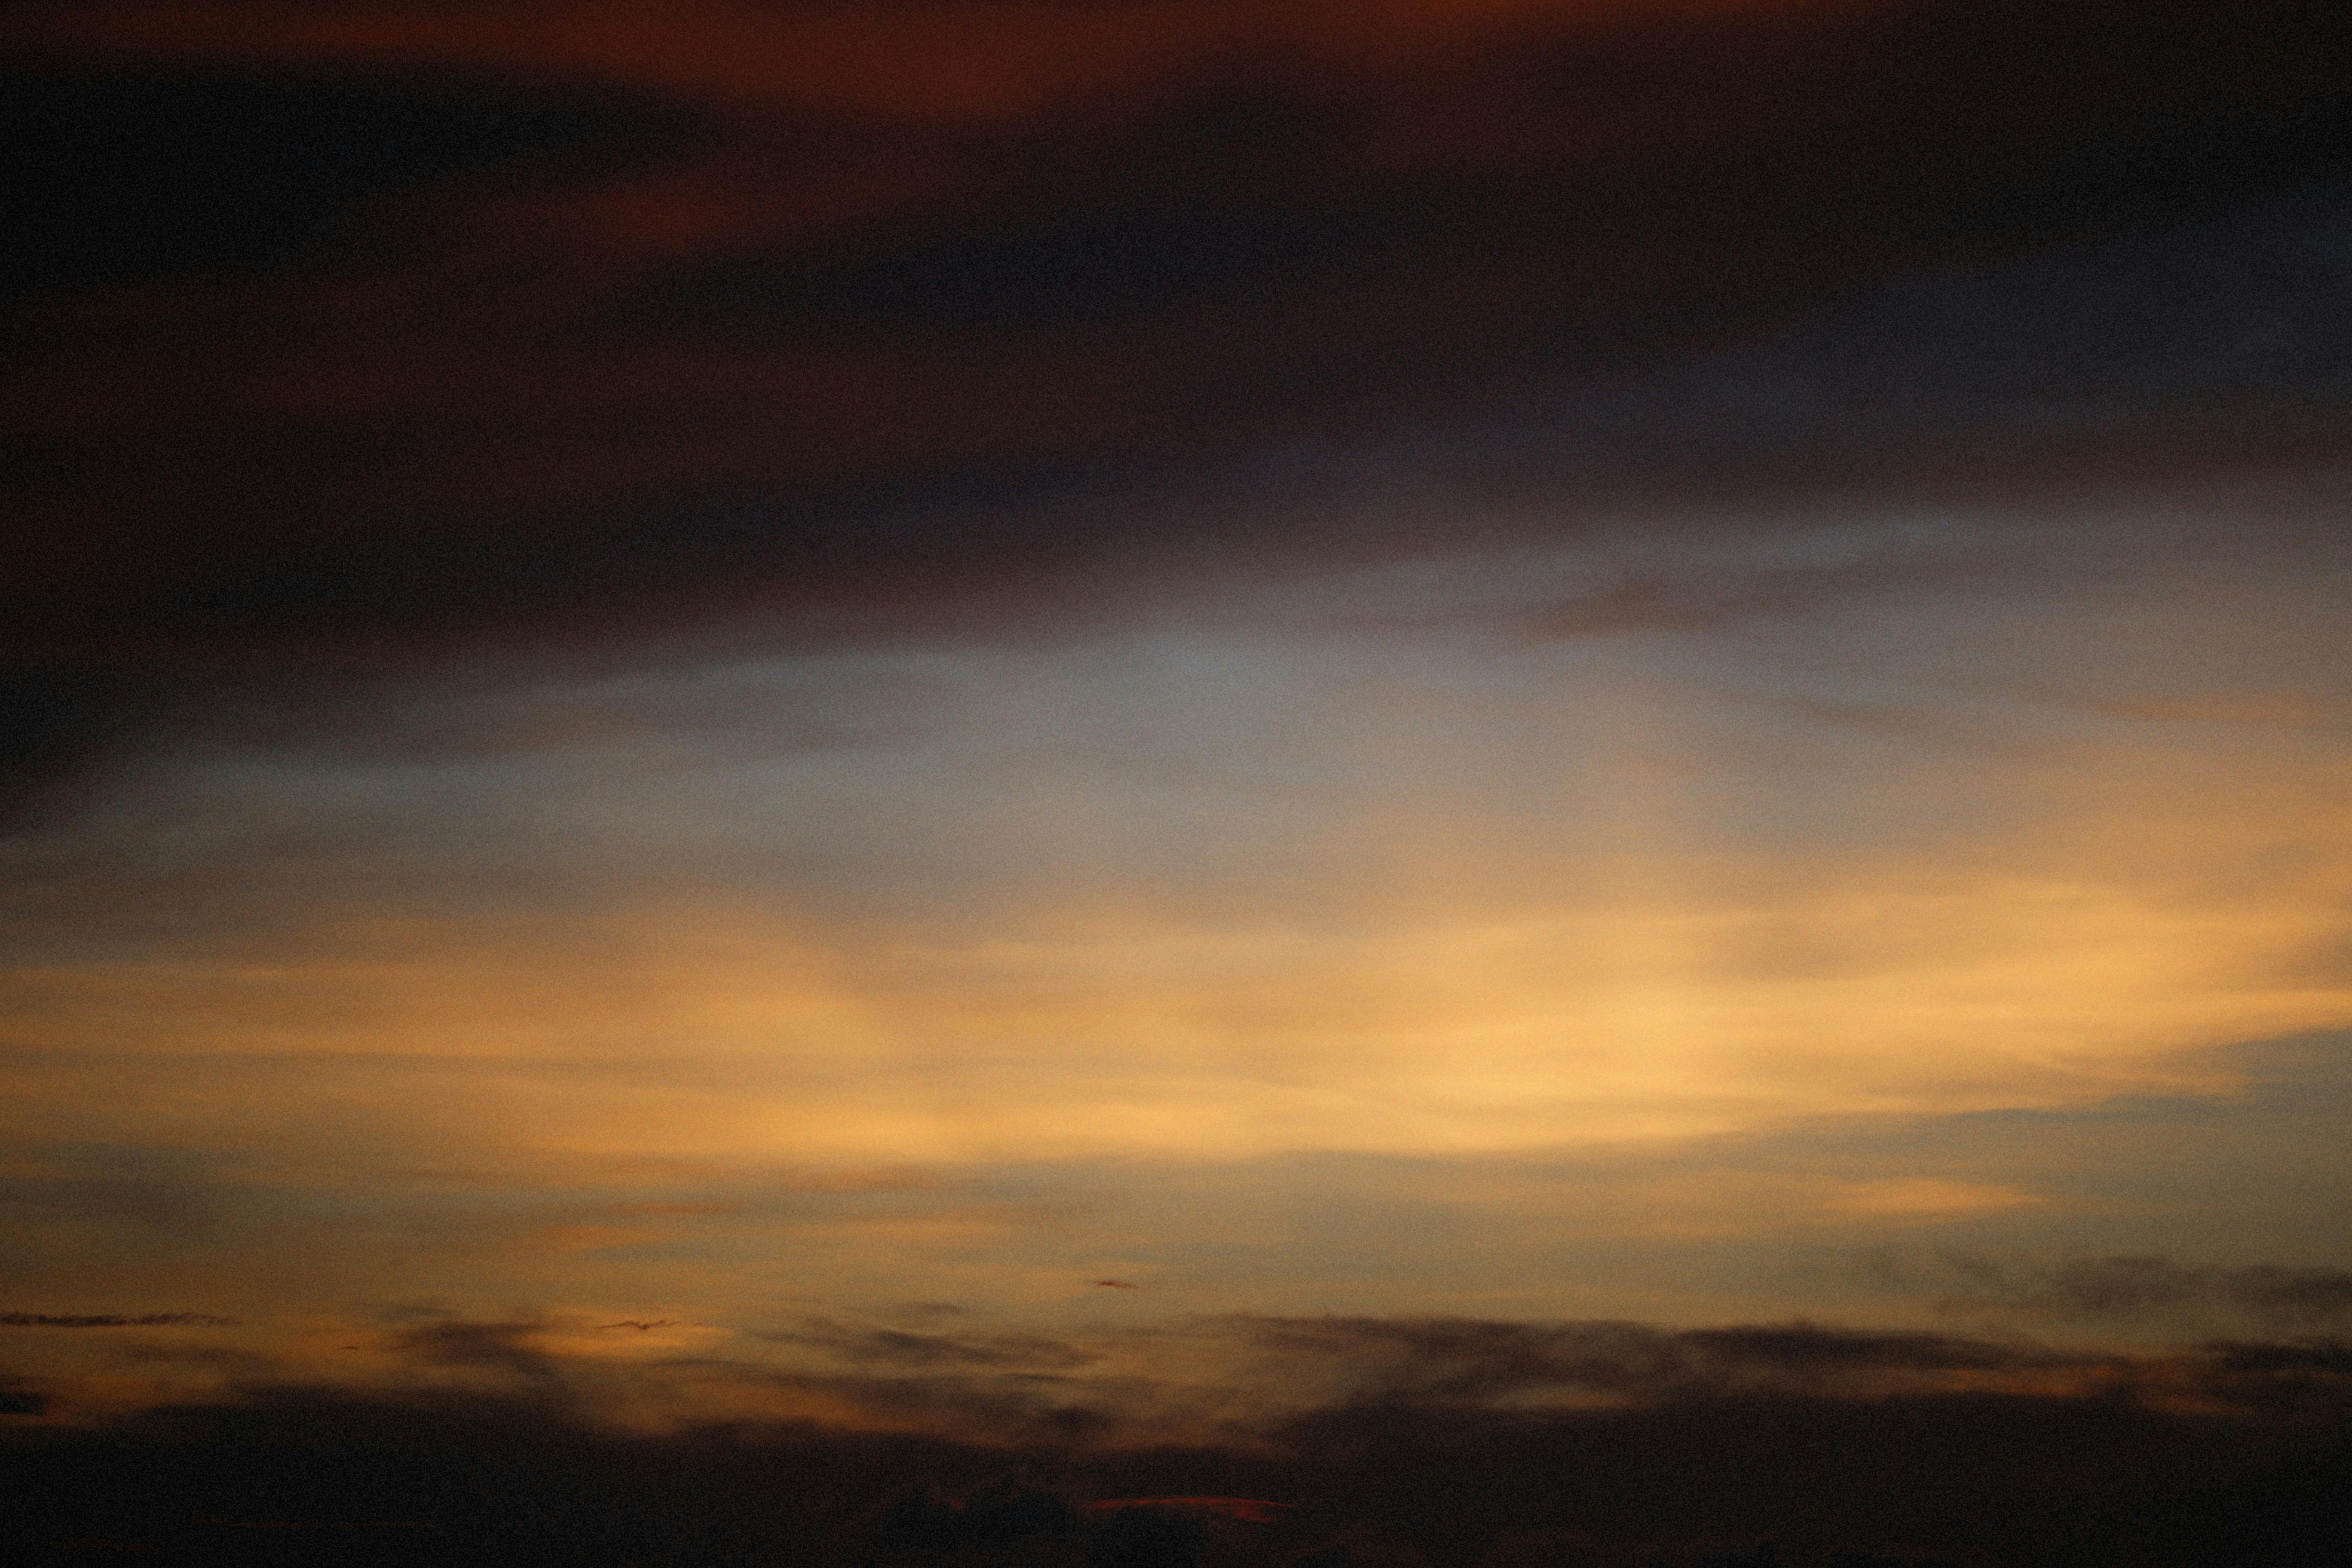 Soft Clouds Up In The Sky During Sunset by Stocksy Contributor Marilar  Irastorza - Stocksy